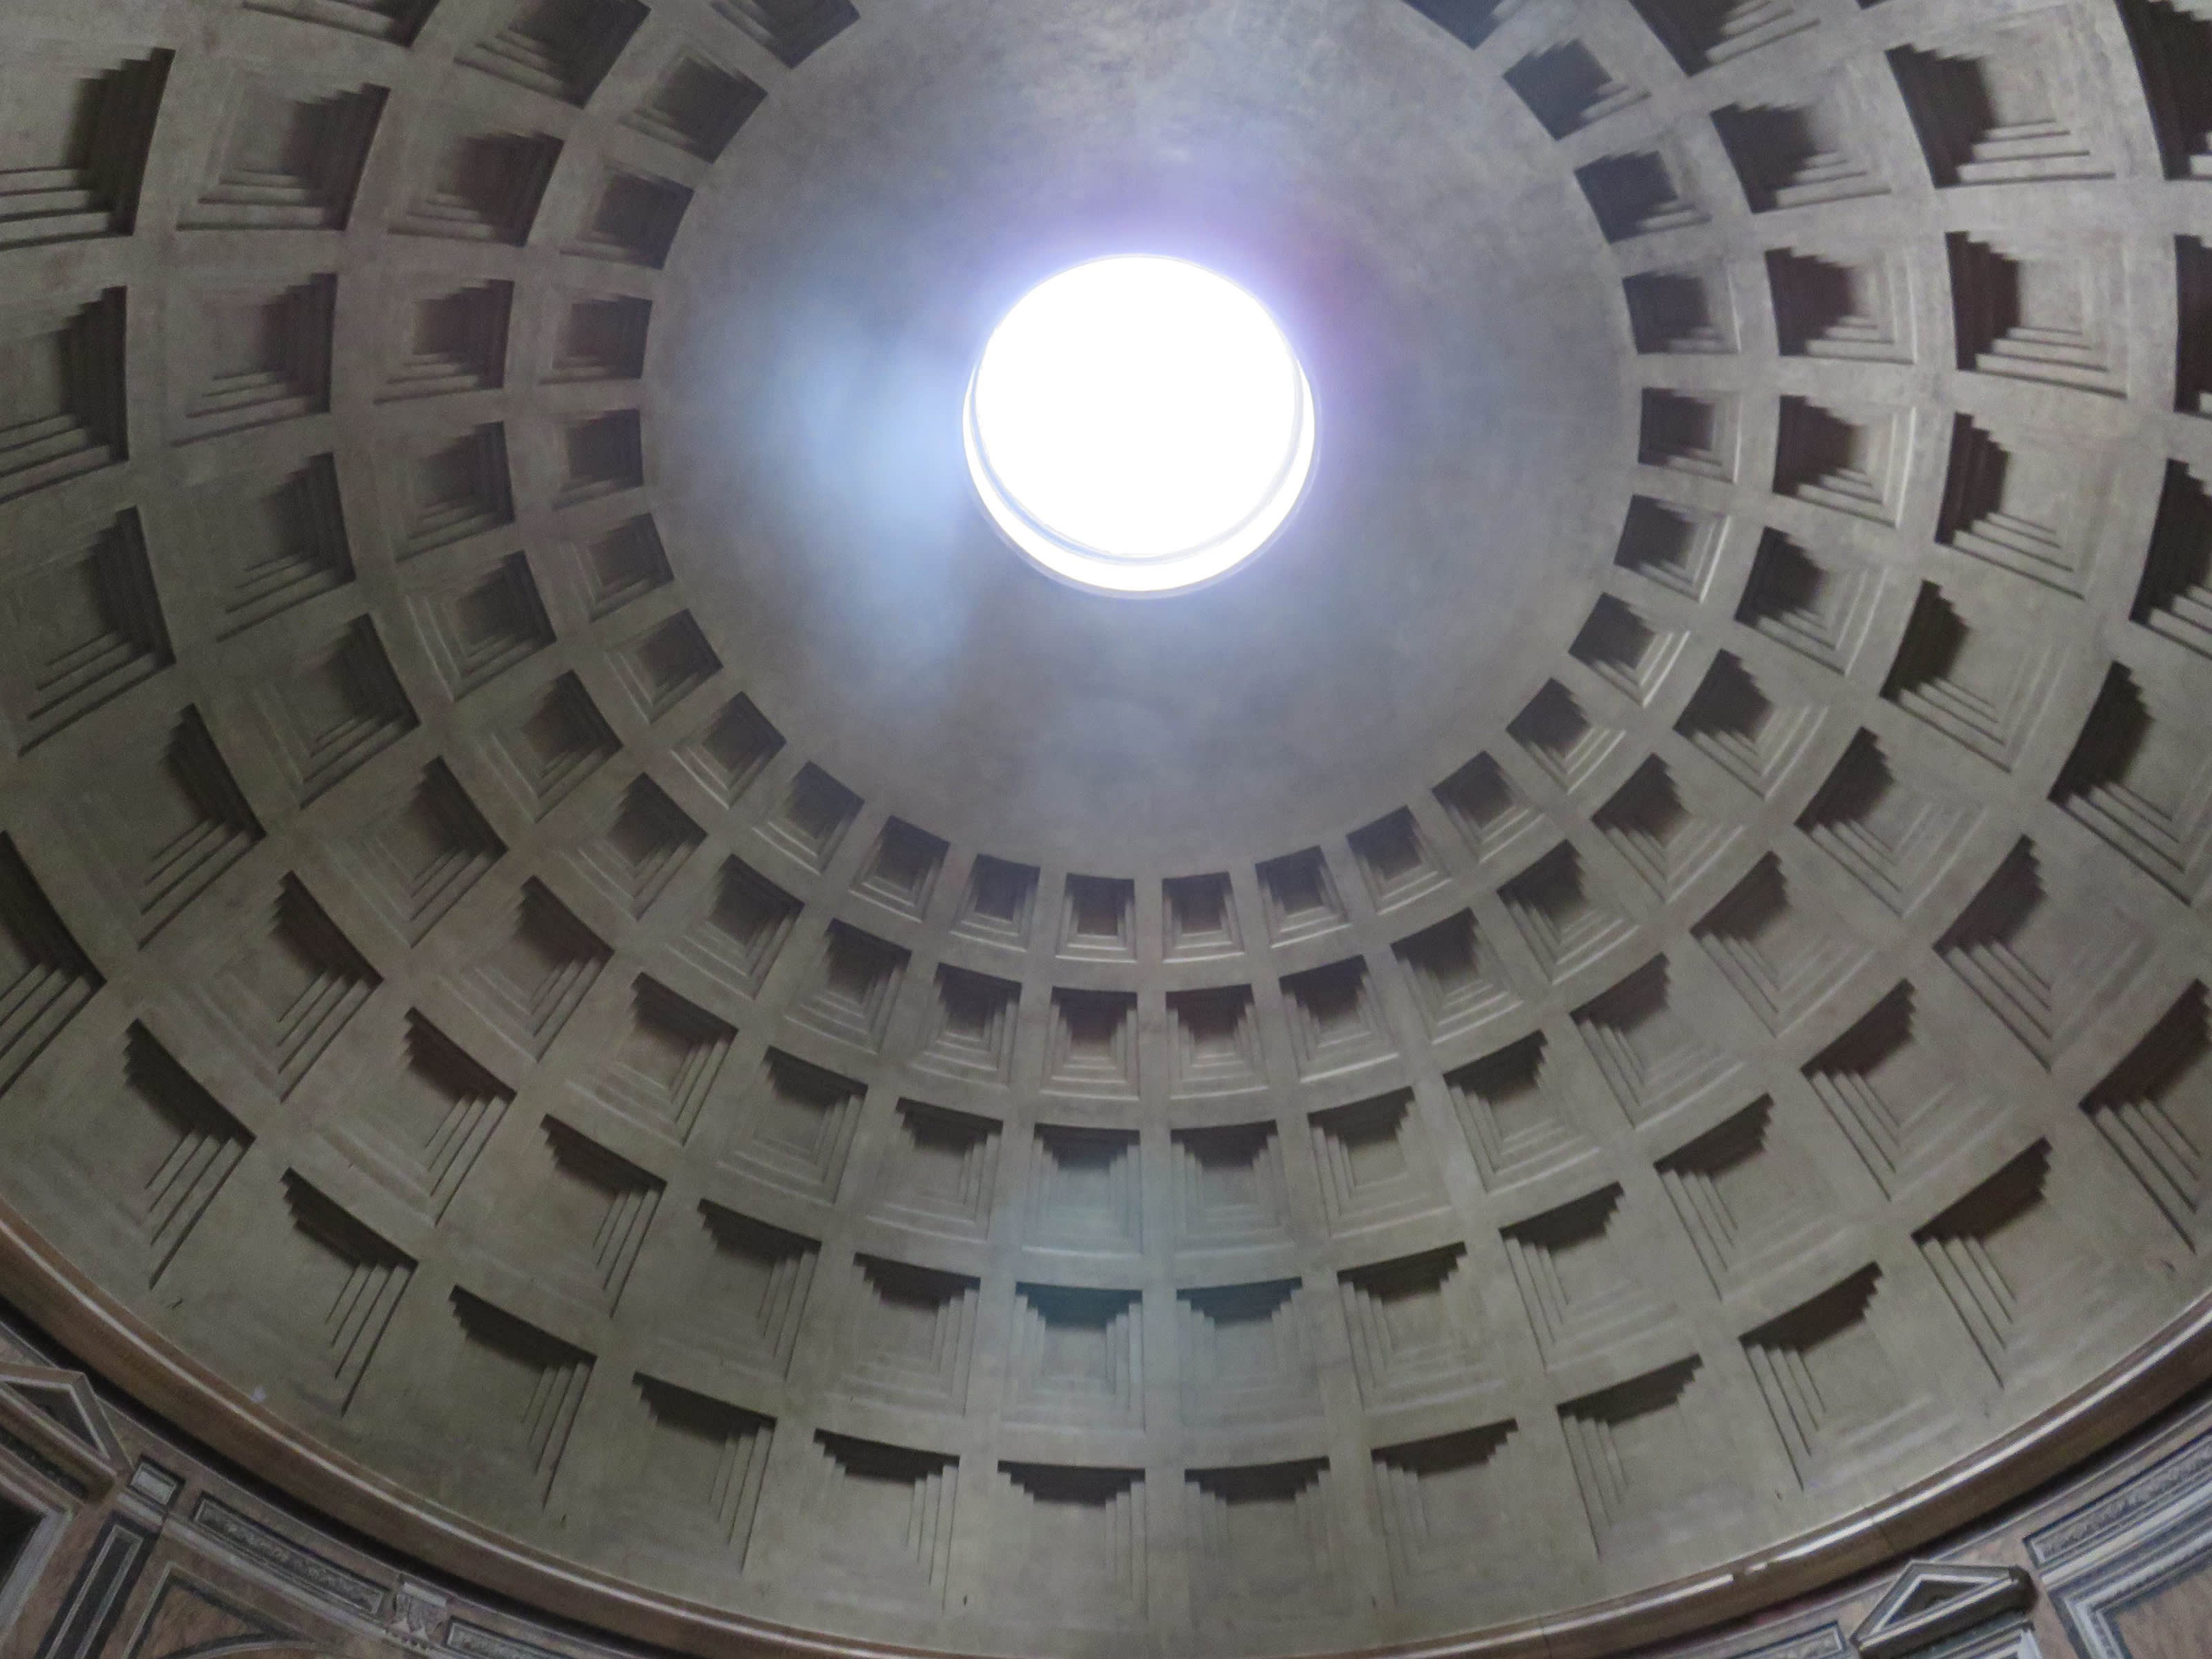 THE PANTHEON IS AN EXCELLENT EXAMPLE OF THE ENDURING QUALITY OF ROMAN CONCRETES USING VOLCANIC ASH.